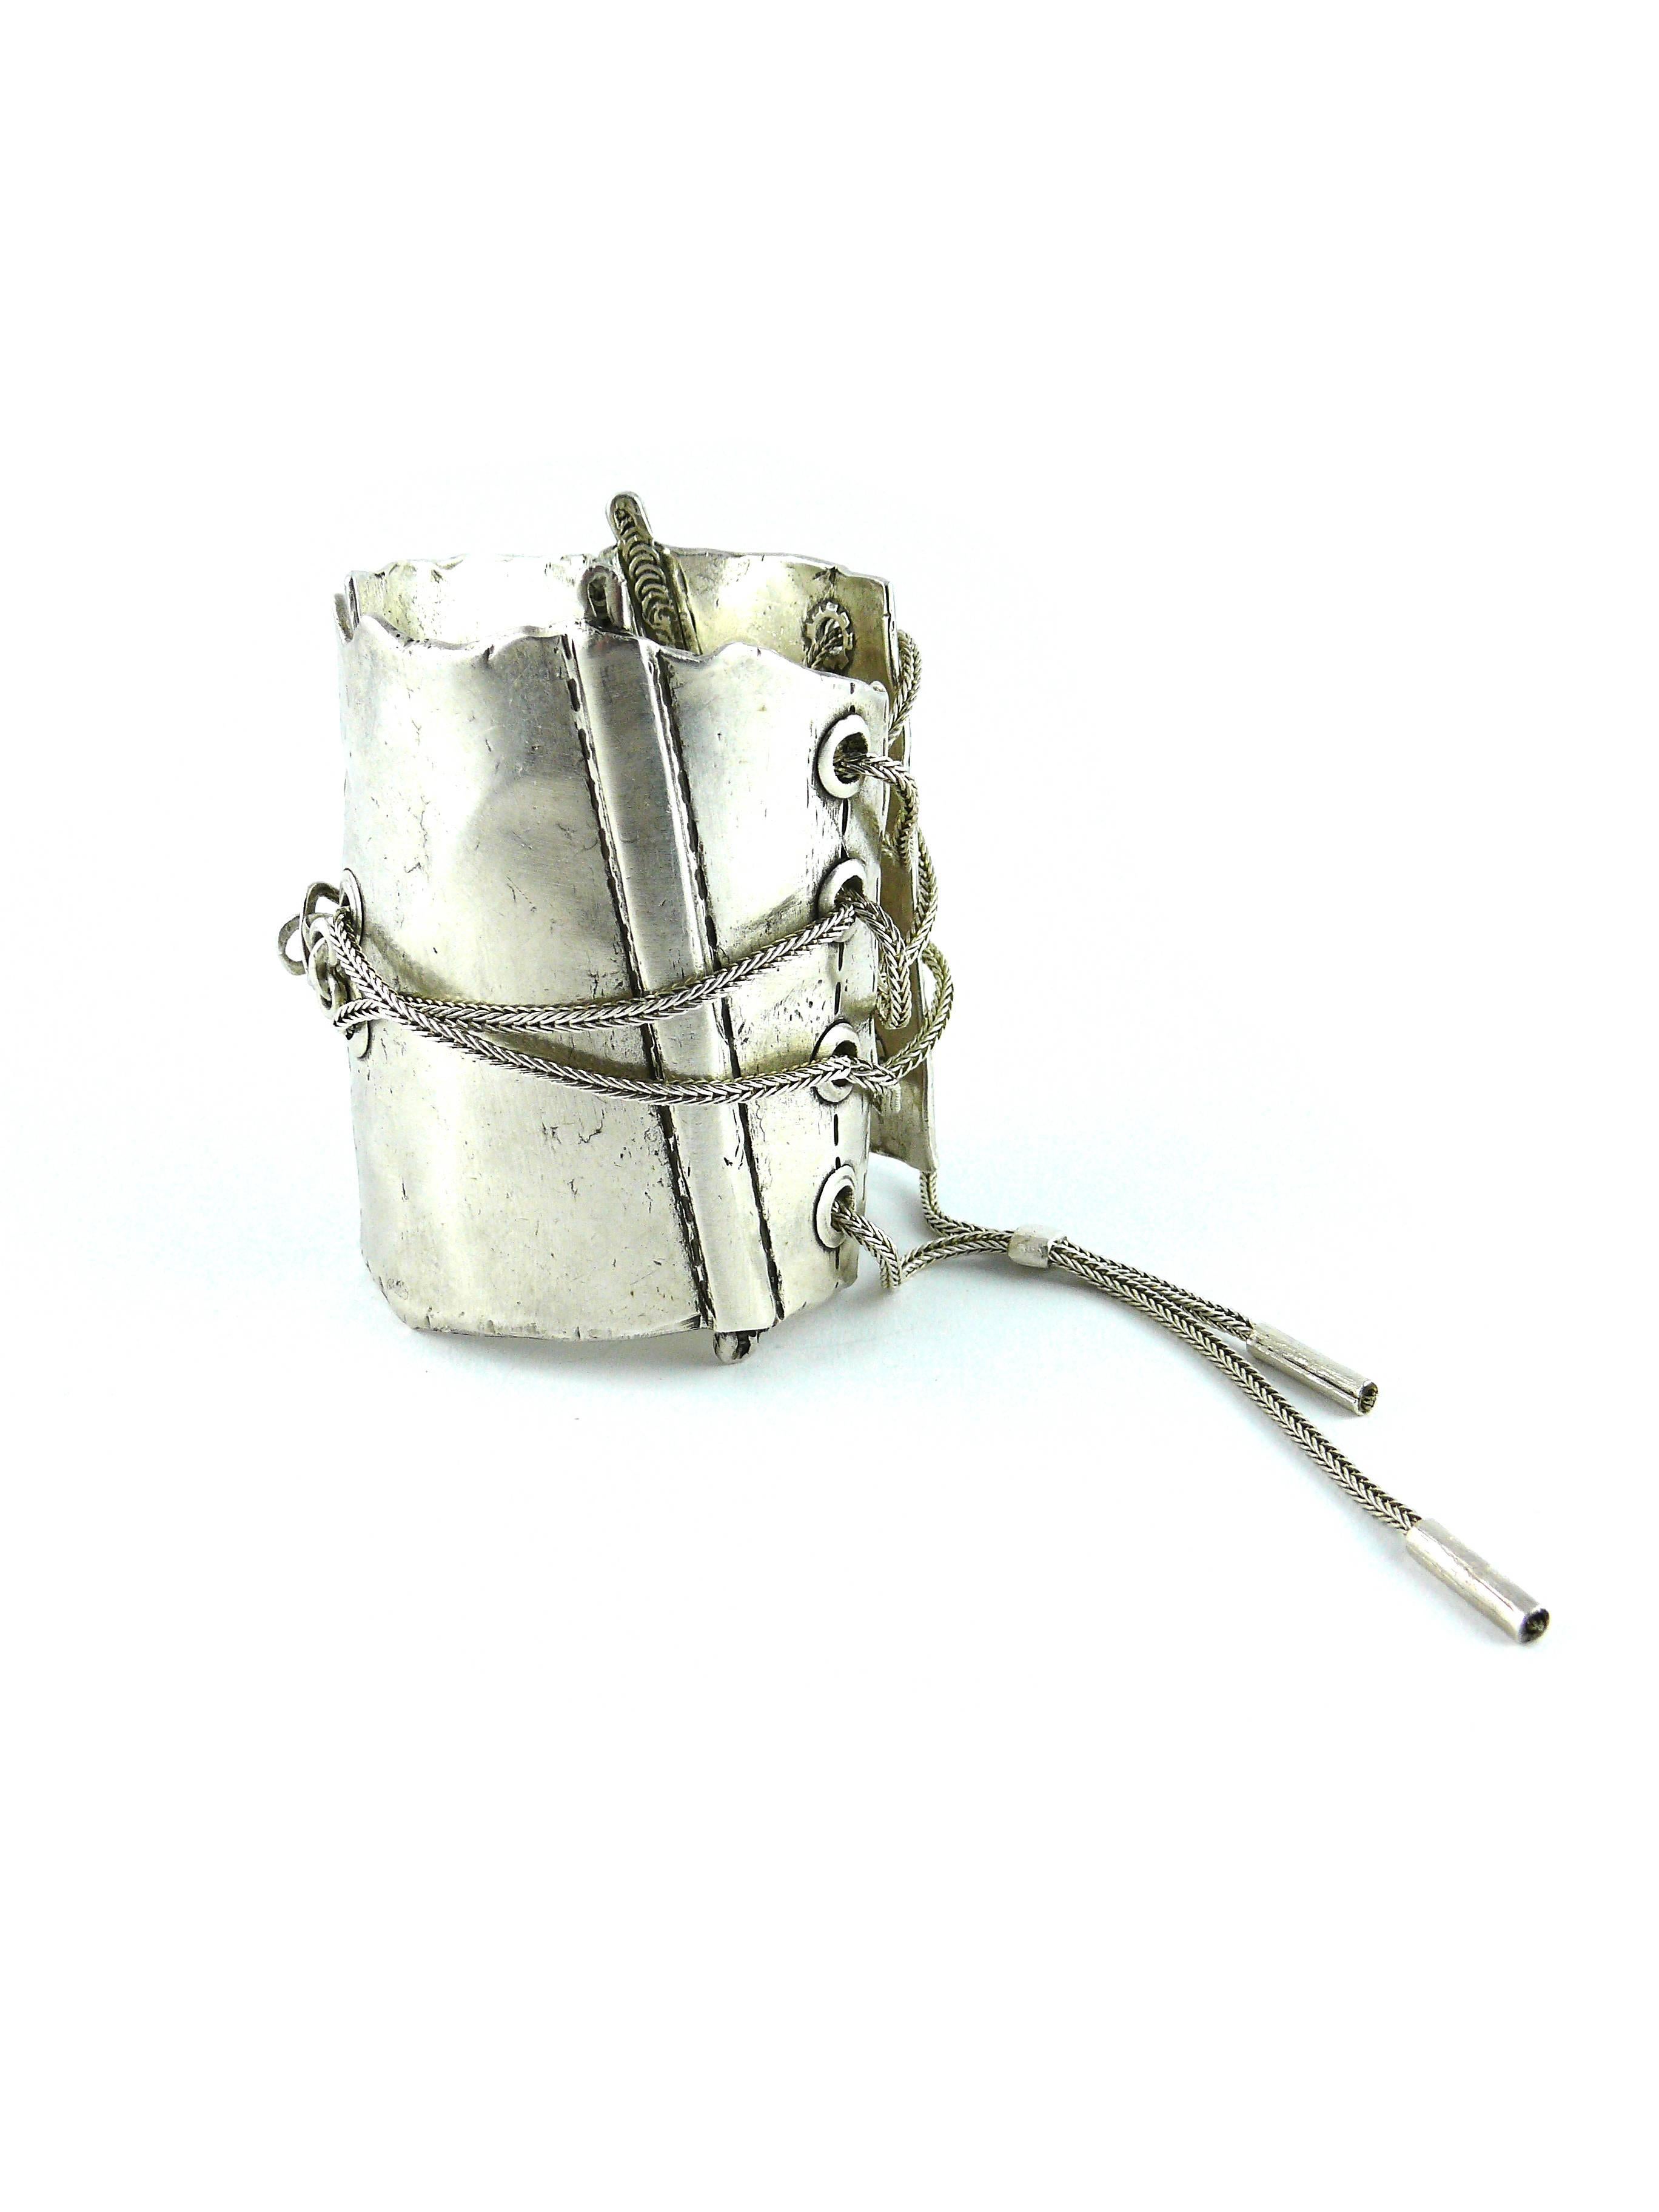 JEAN PAUL GAULTIER rarest sterling silver cuff bracelet featuring the iconic corset.

Very nicely detailed with whalebones, seams, reliefs, lacing and eyelets.

This bracelet closes at the back with a hook, and adjust with the lacing system to